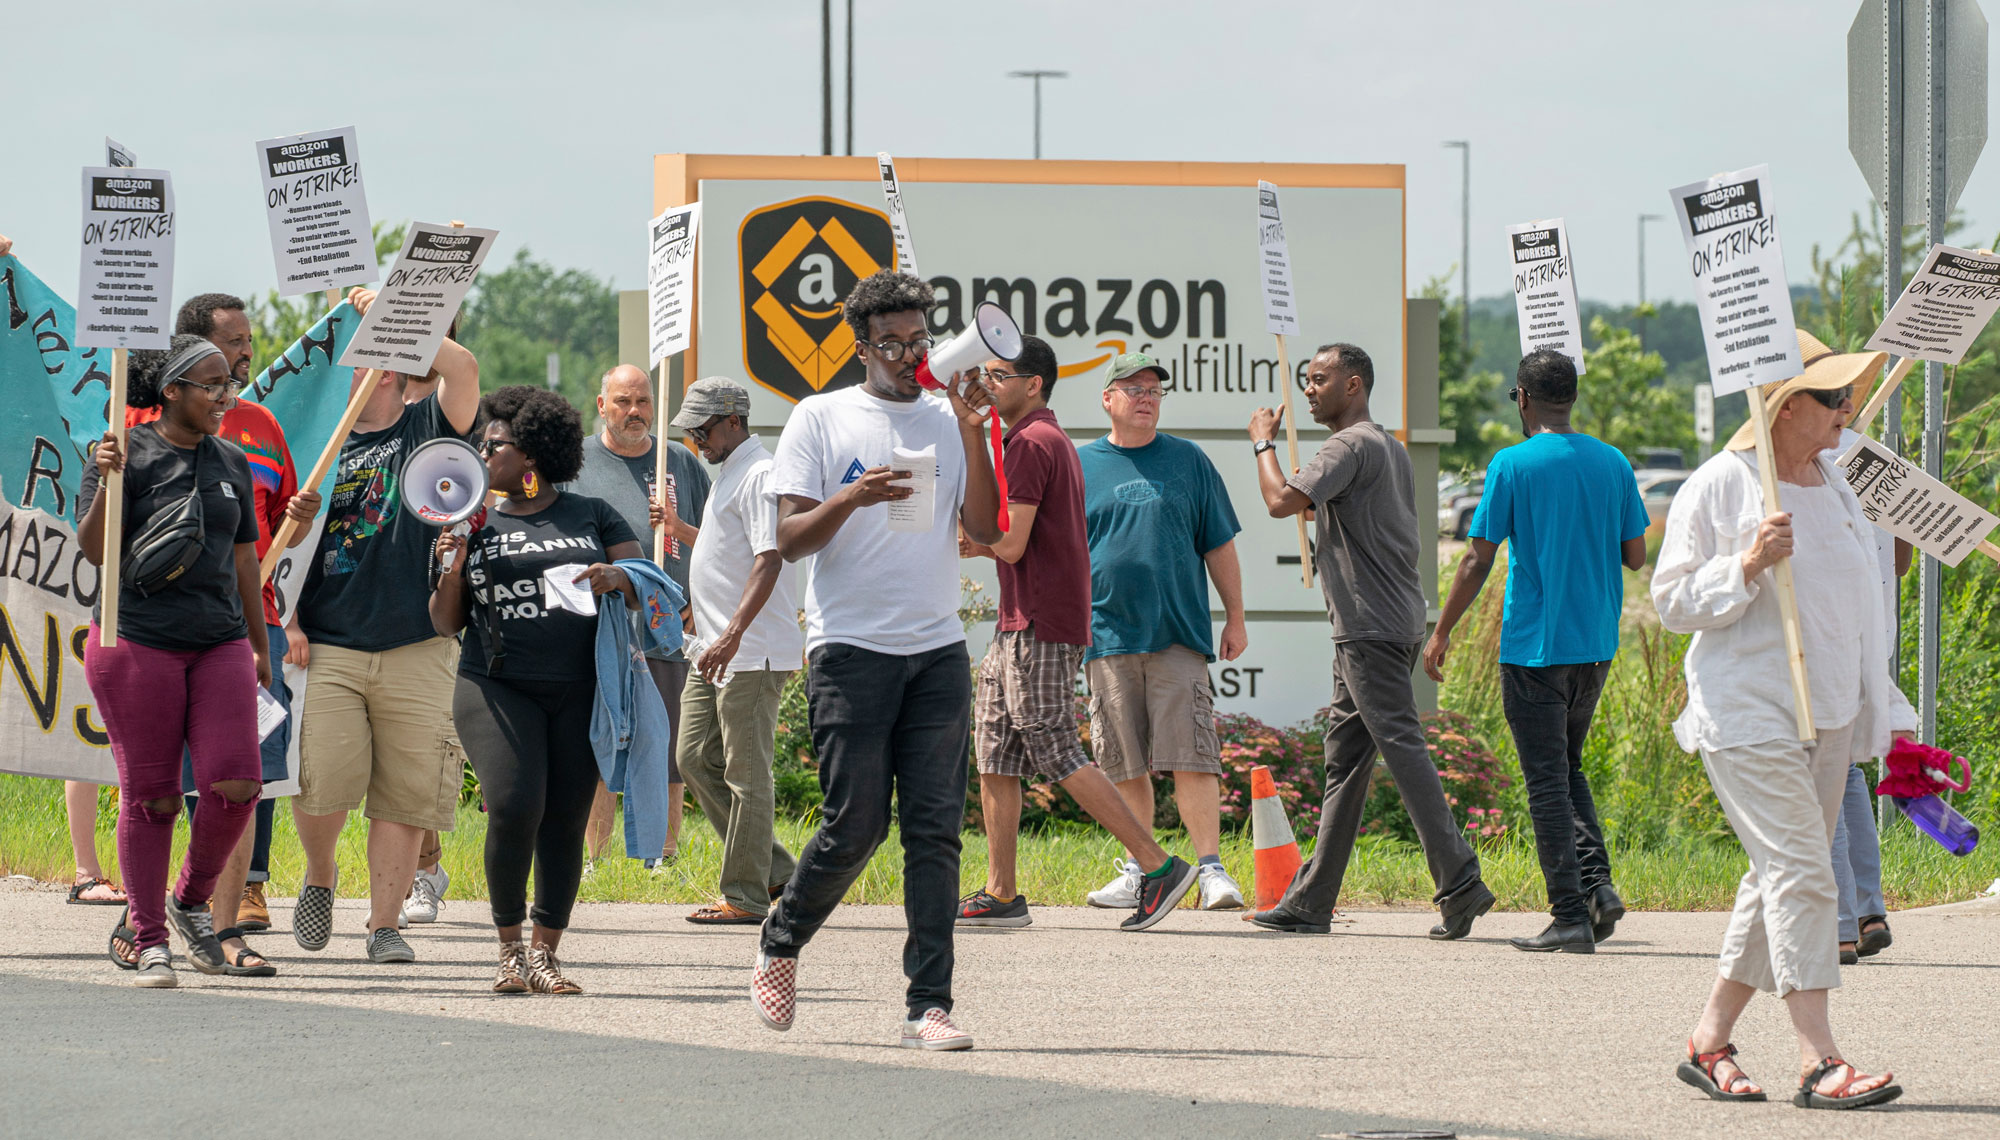 Amazon workers at one of its warehouses go on strike